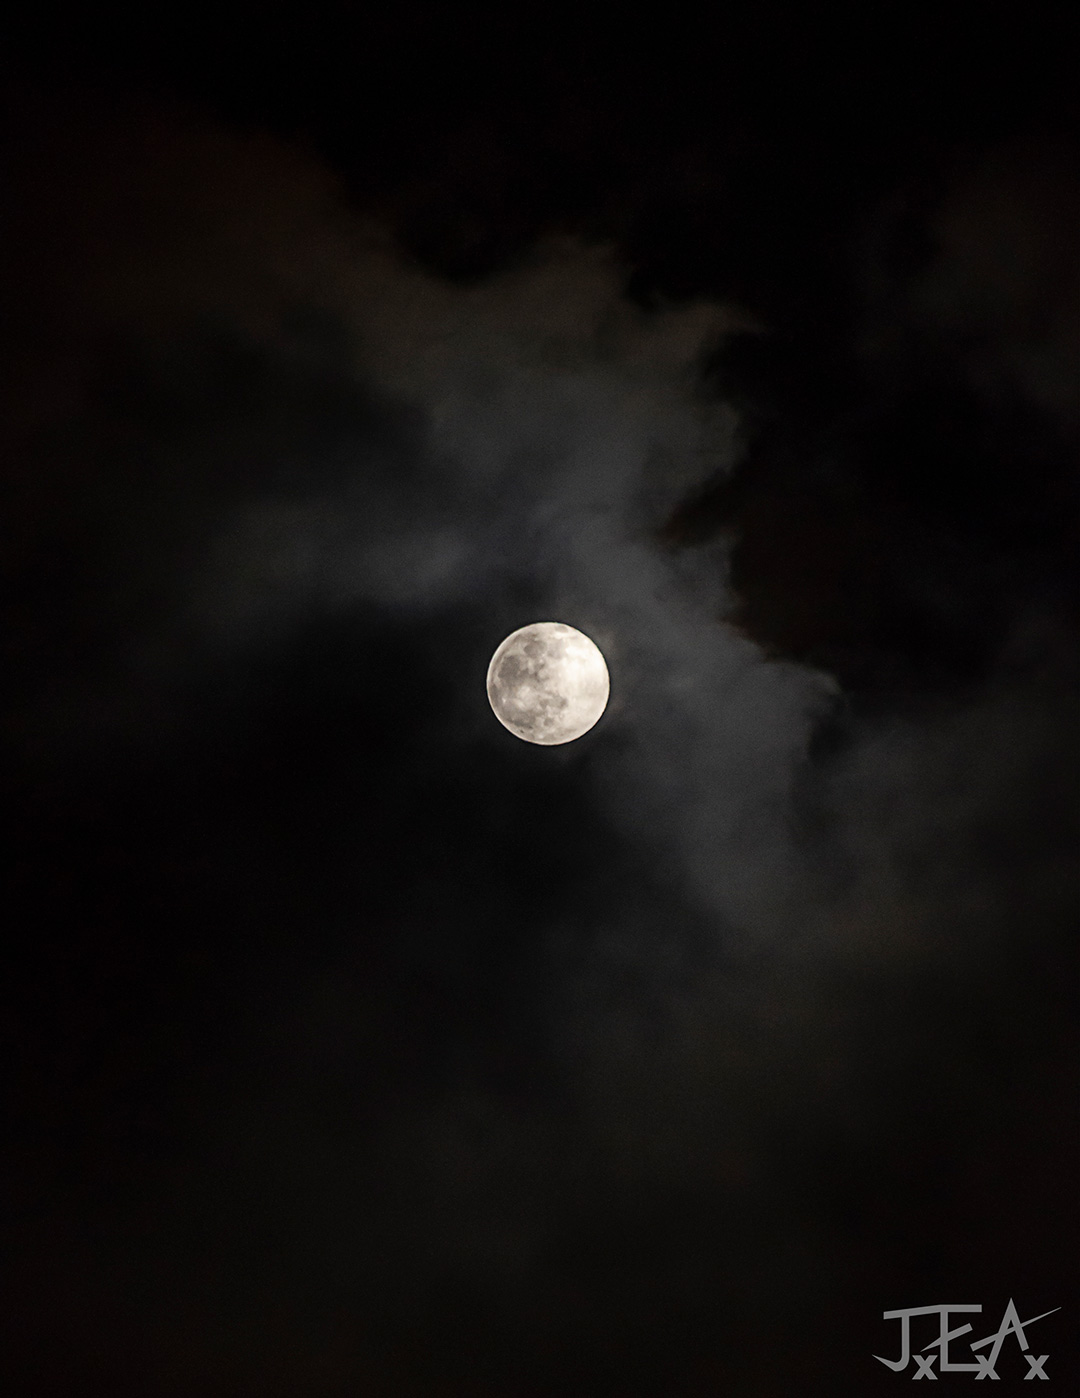 The moon sits full in center frame, illuminating some light clouds against a pitch black sky.